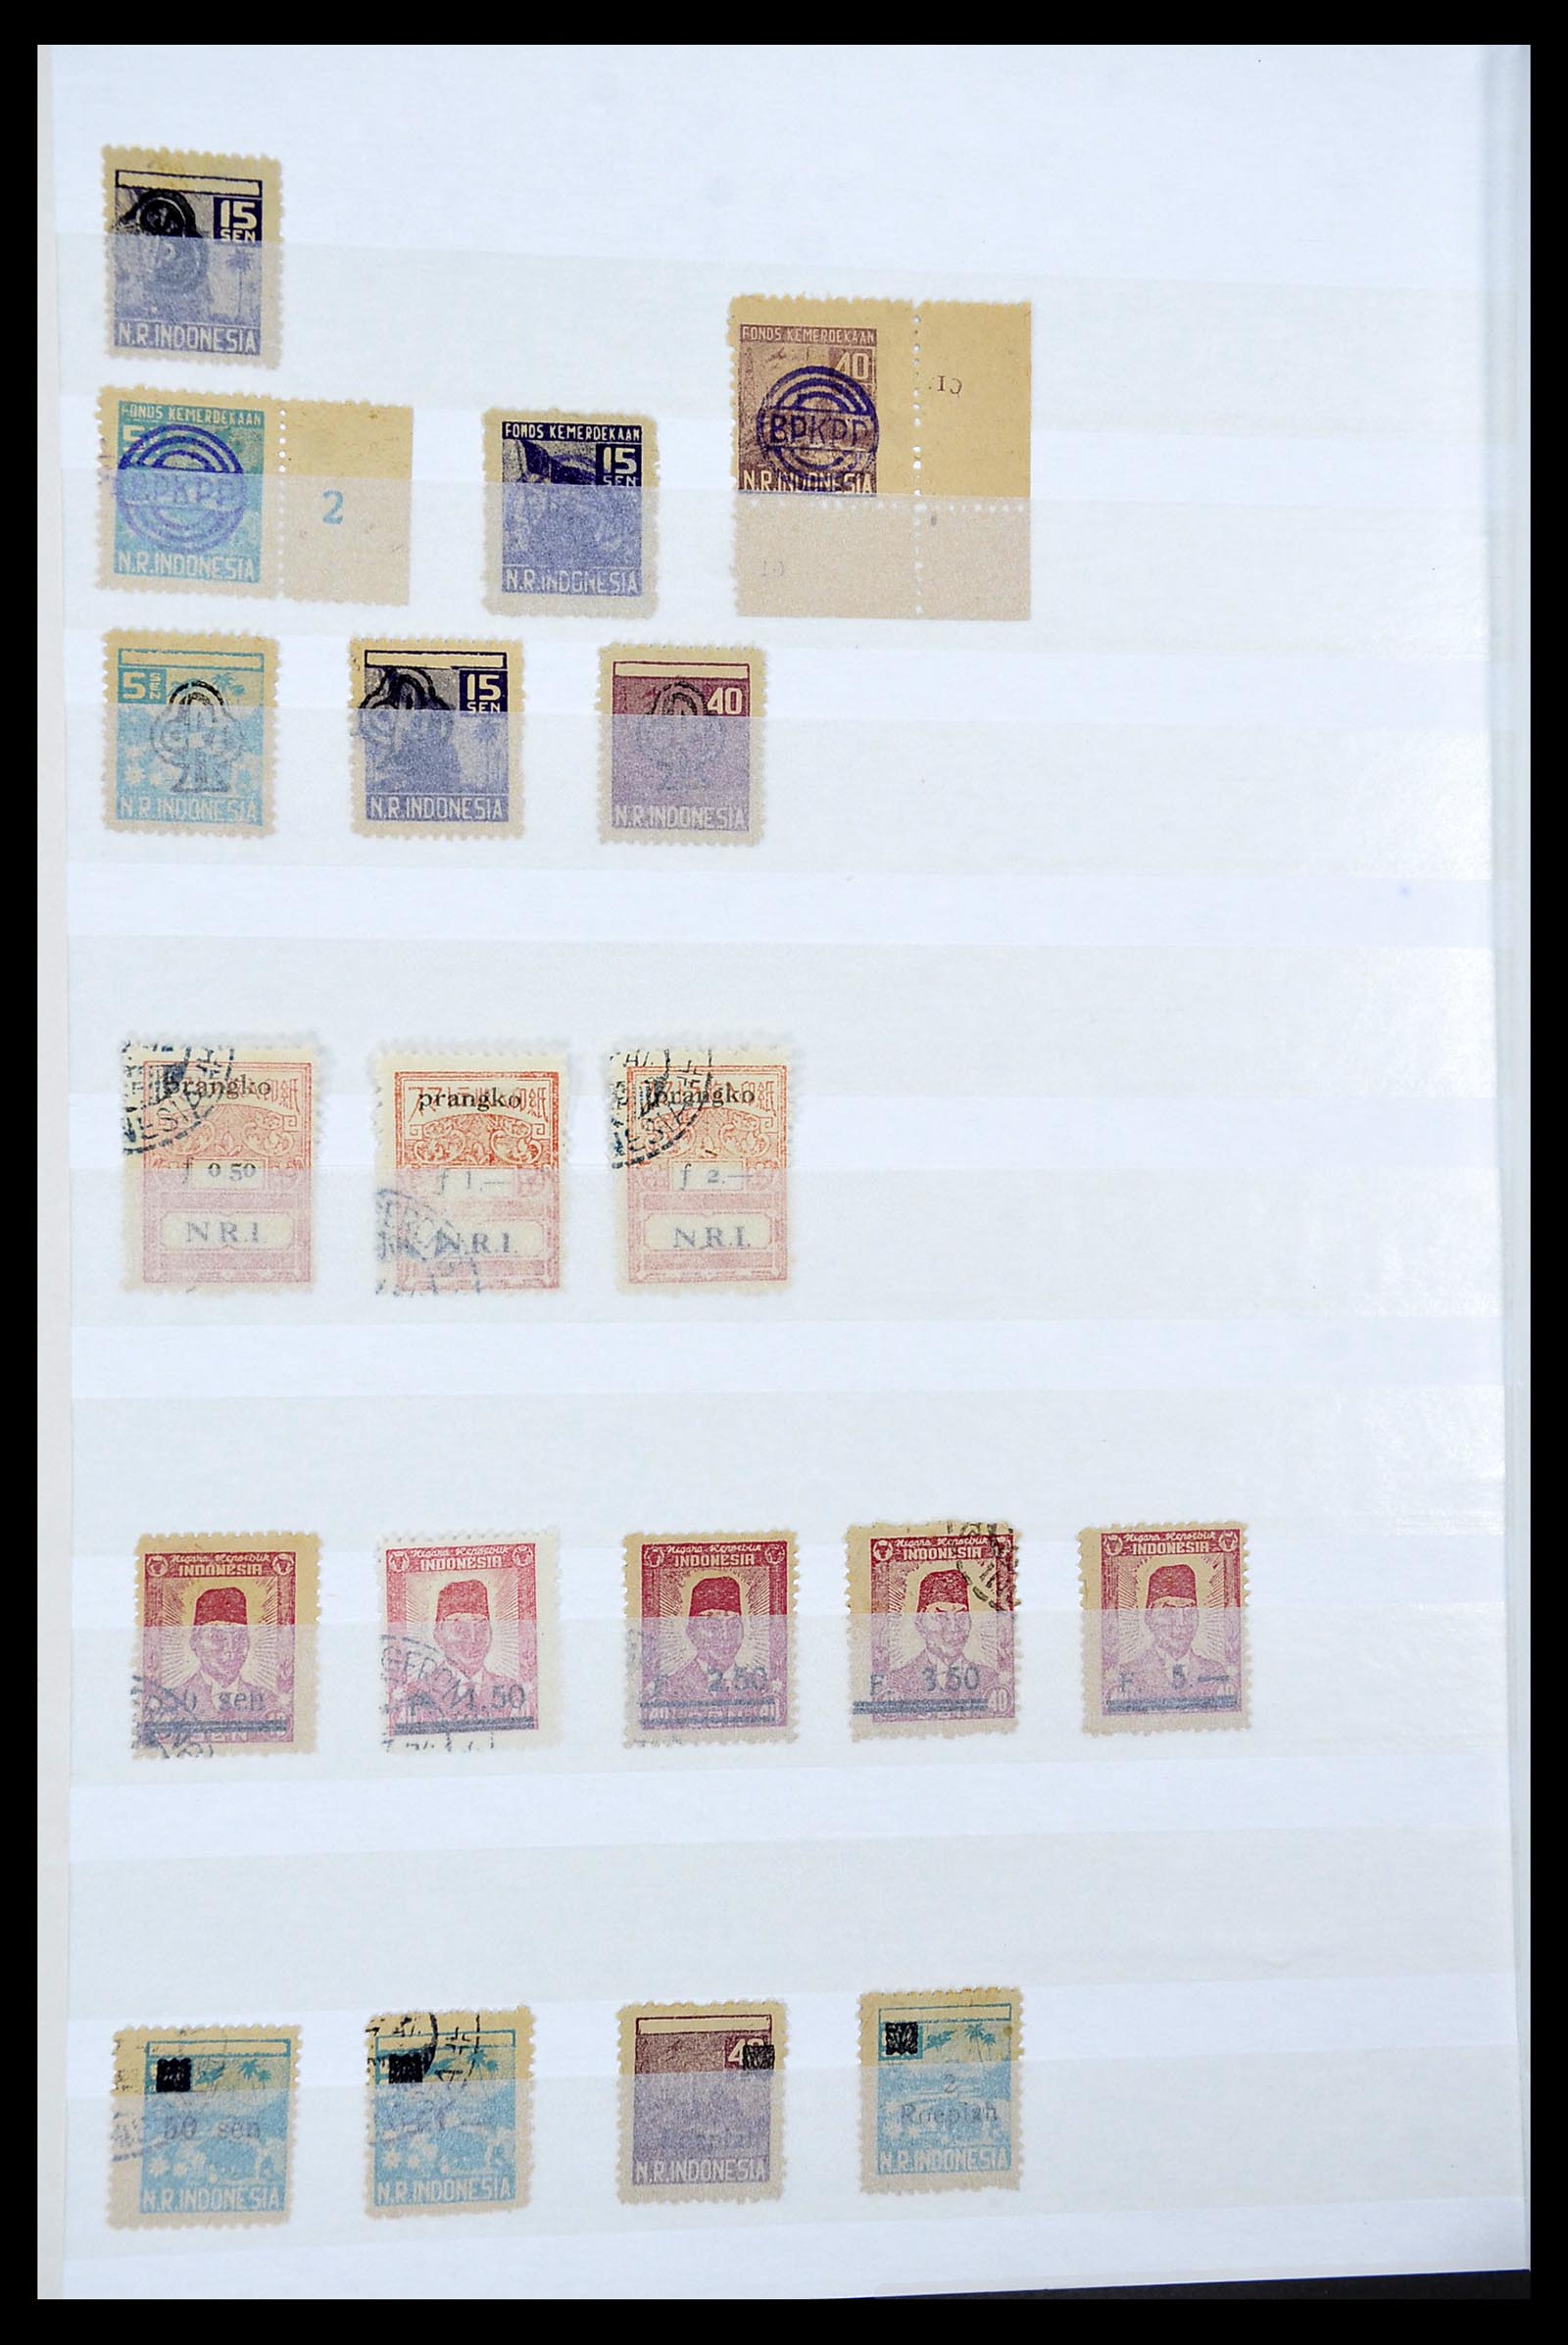 34545 044 - Stamp Collection 34545 Japanese Occupation of the Dutch East Indies and 